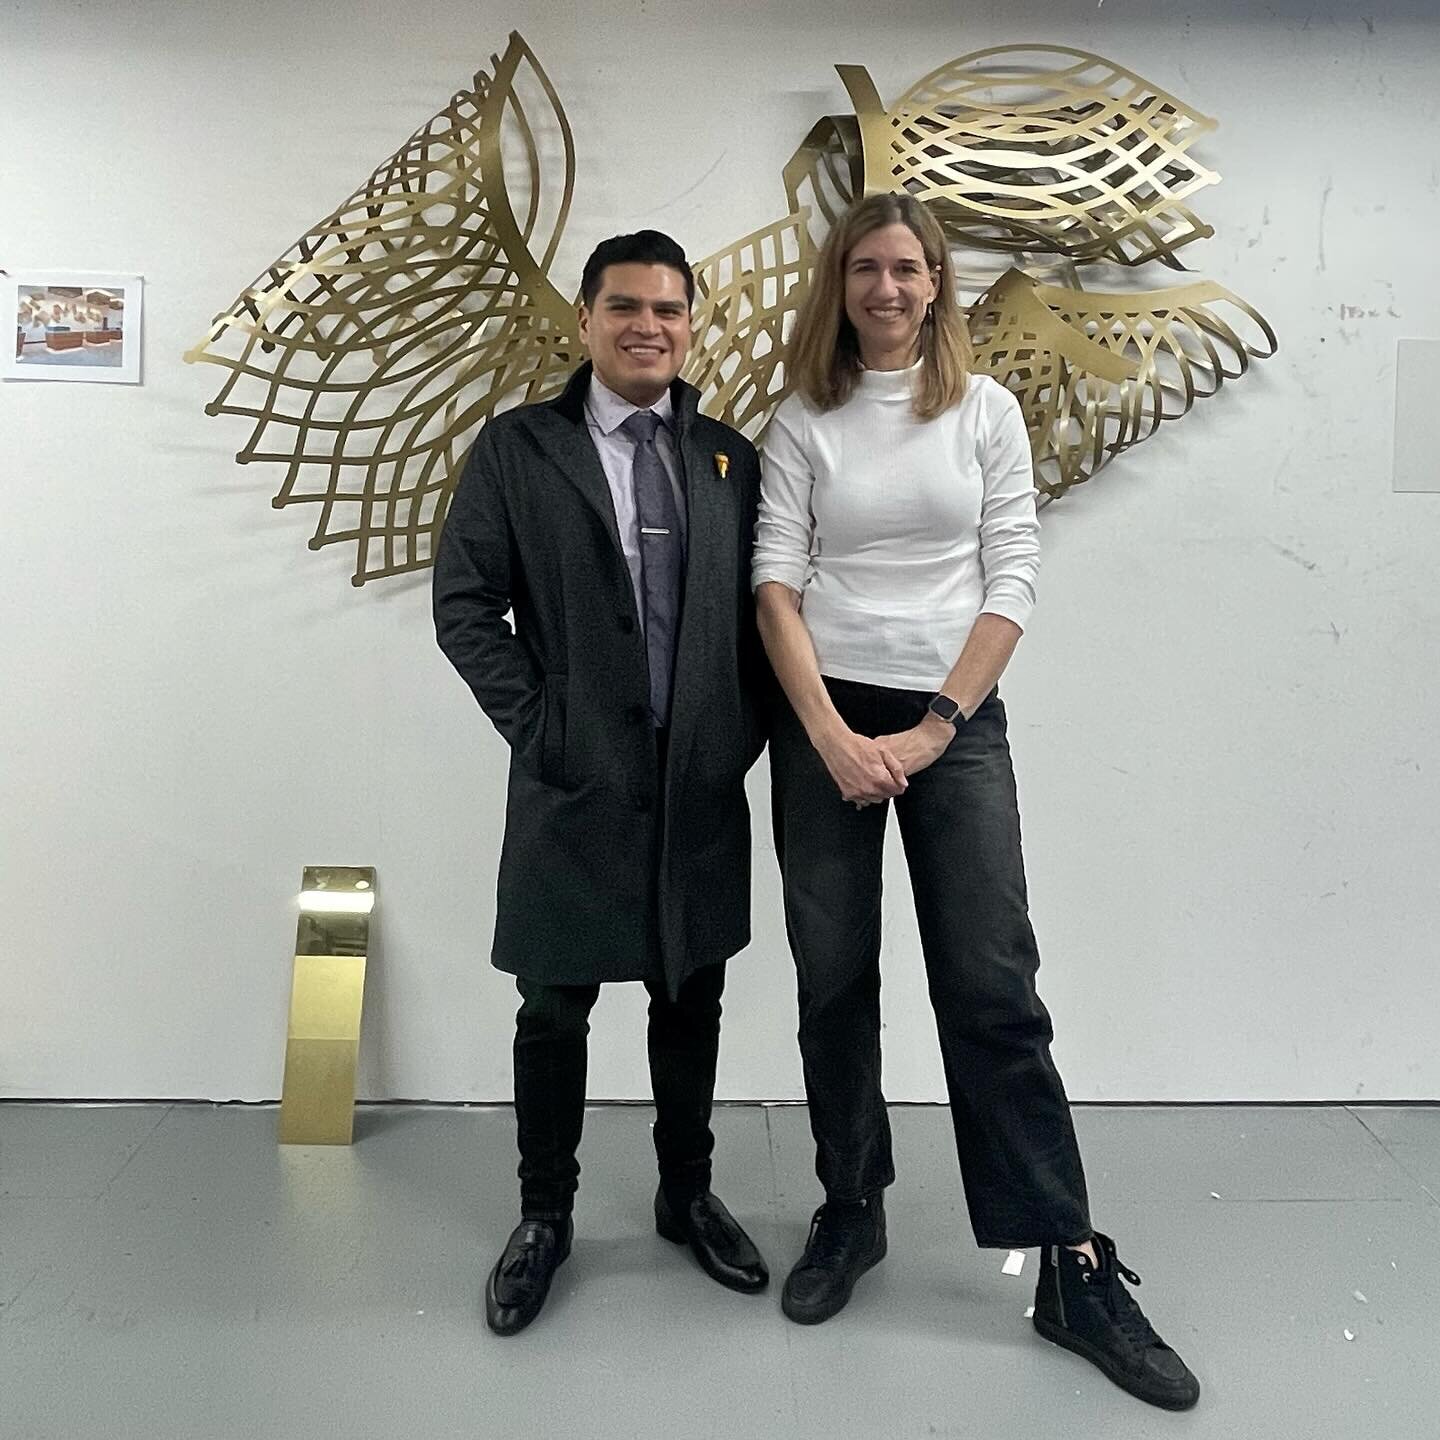 Thanks @rodyn.lopez Executive Director and Artist Circle members from @craftcontemporary for spending time in my studio today discussing my artistic practice. It was such a pleasure!
#craftmuseum #studiotour #altadenaartiststudio  #margaretrossgriffi